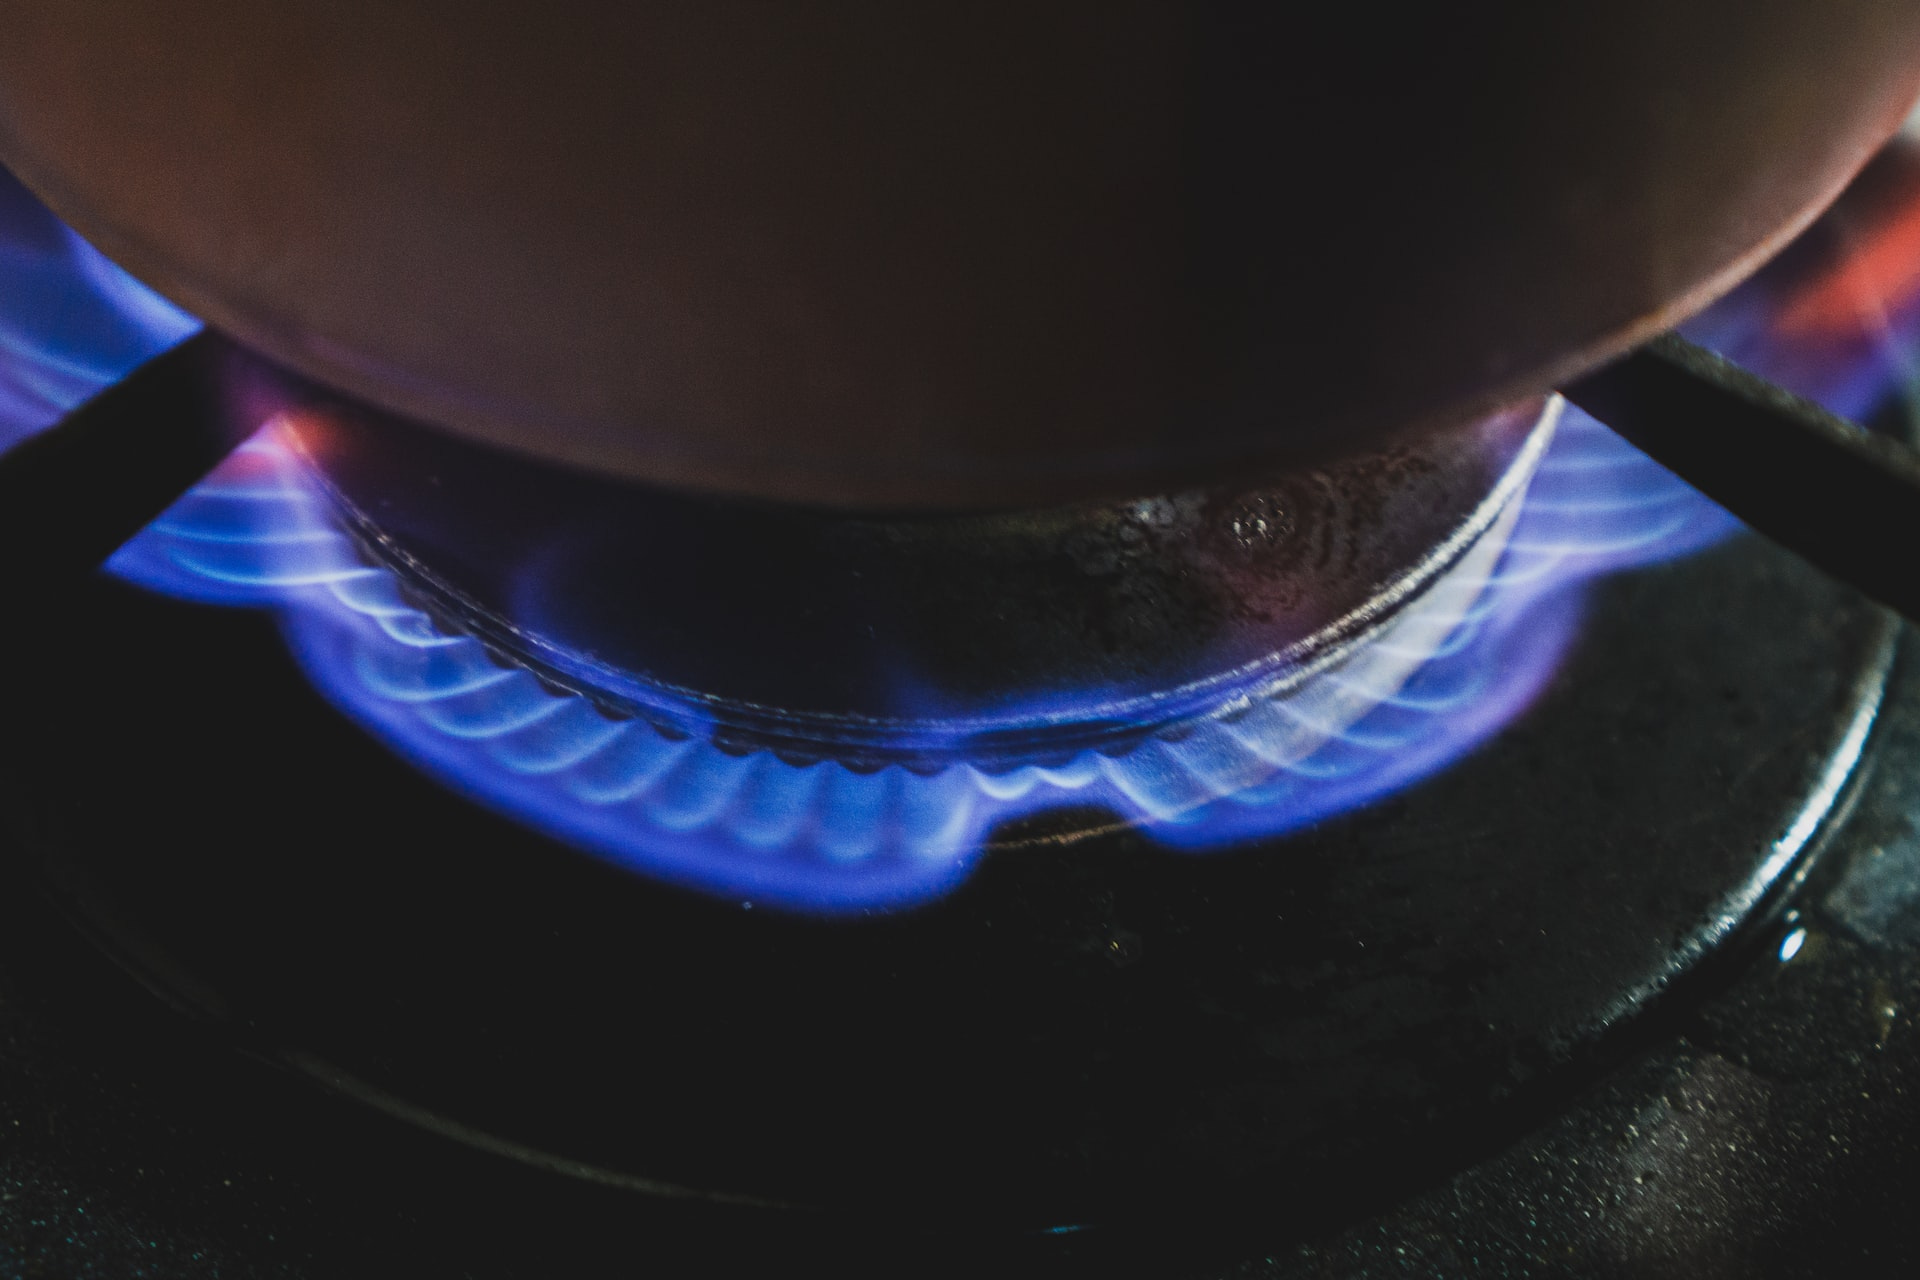 Gas stoves have given 650,000 U.S. children asthma, study finds